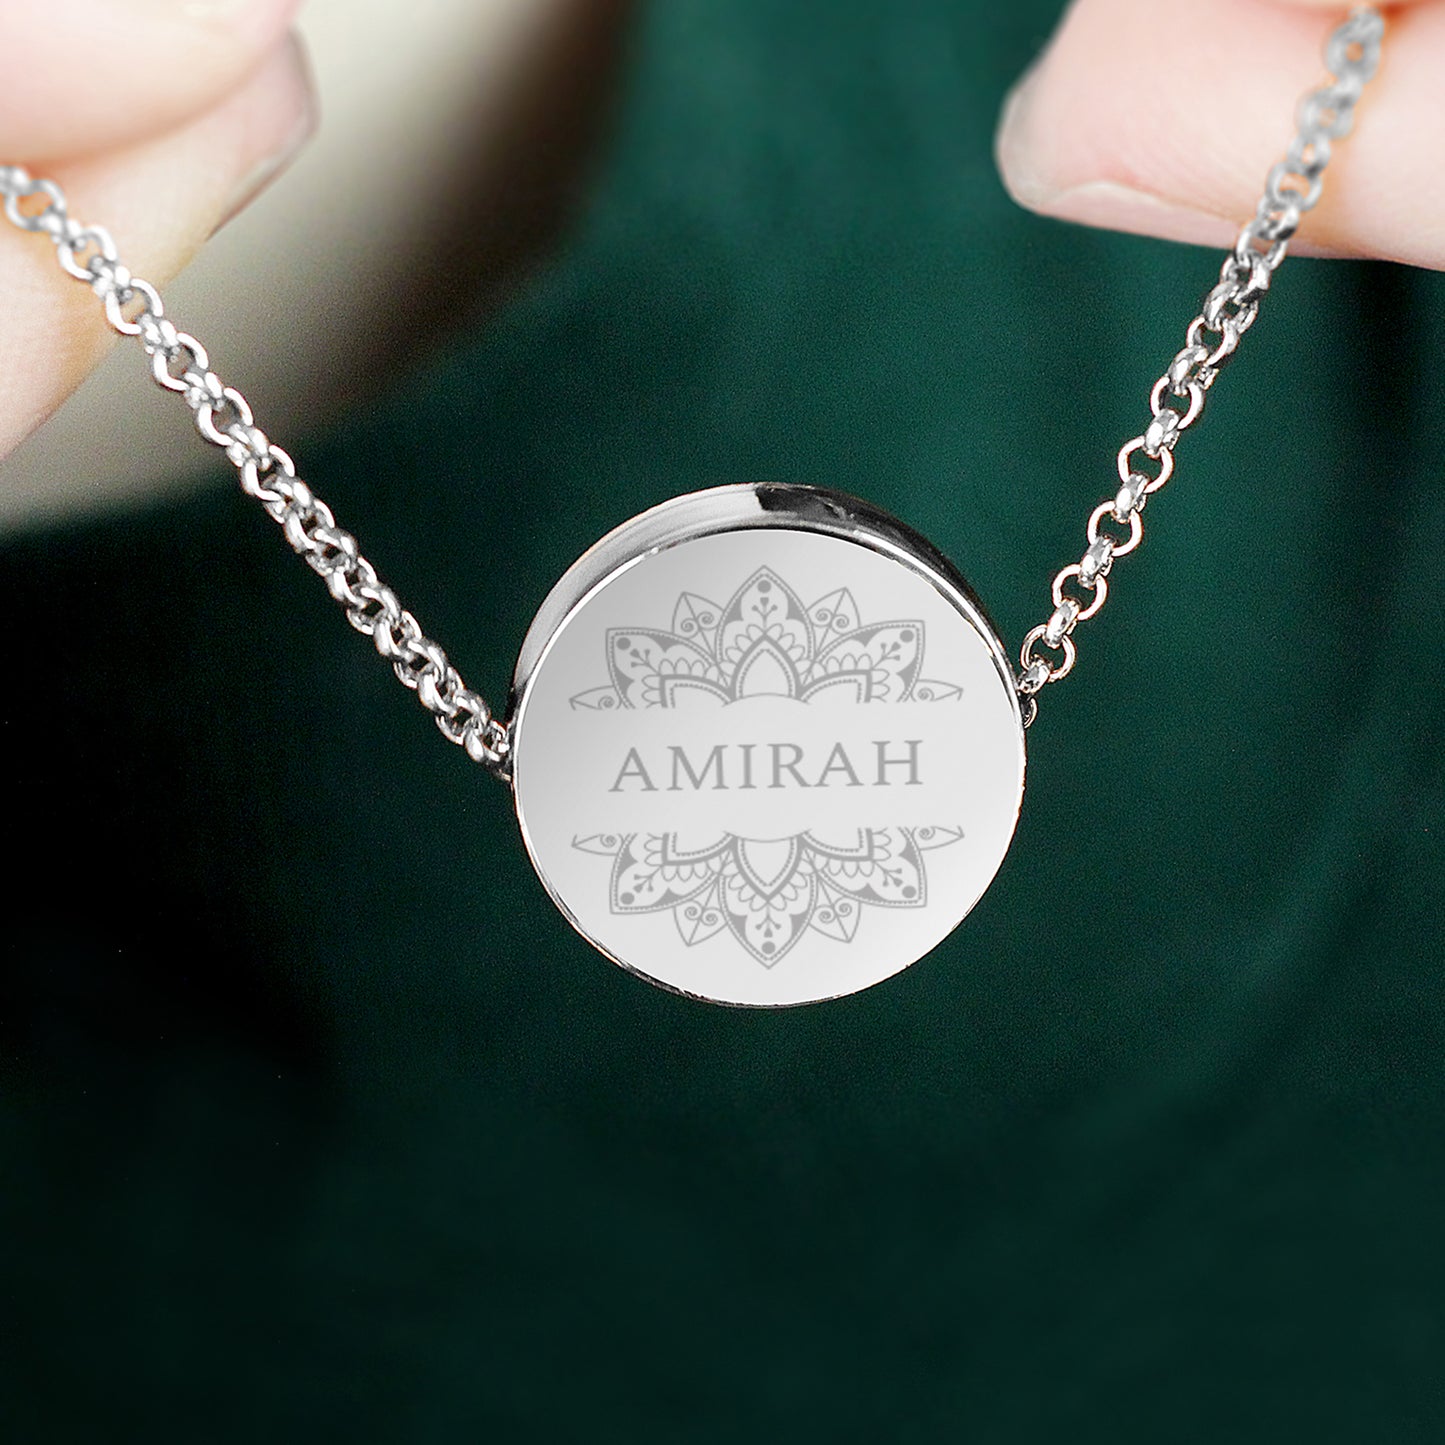 Personalised Sentiment Eid Moon & Star Sterling Silver Necklace and Box - Personalise It!